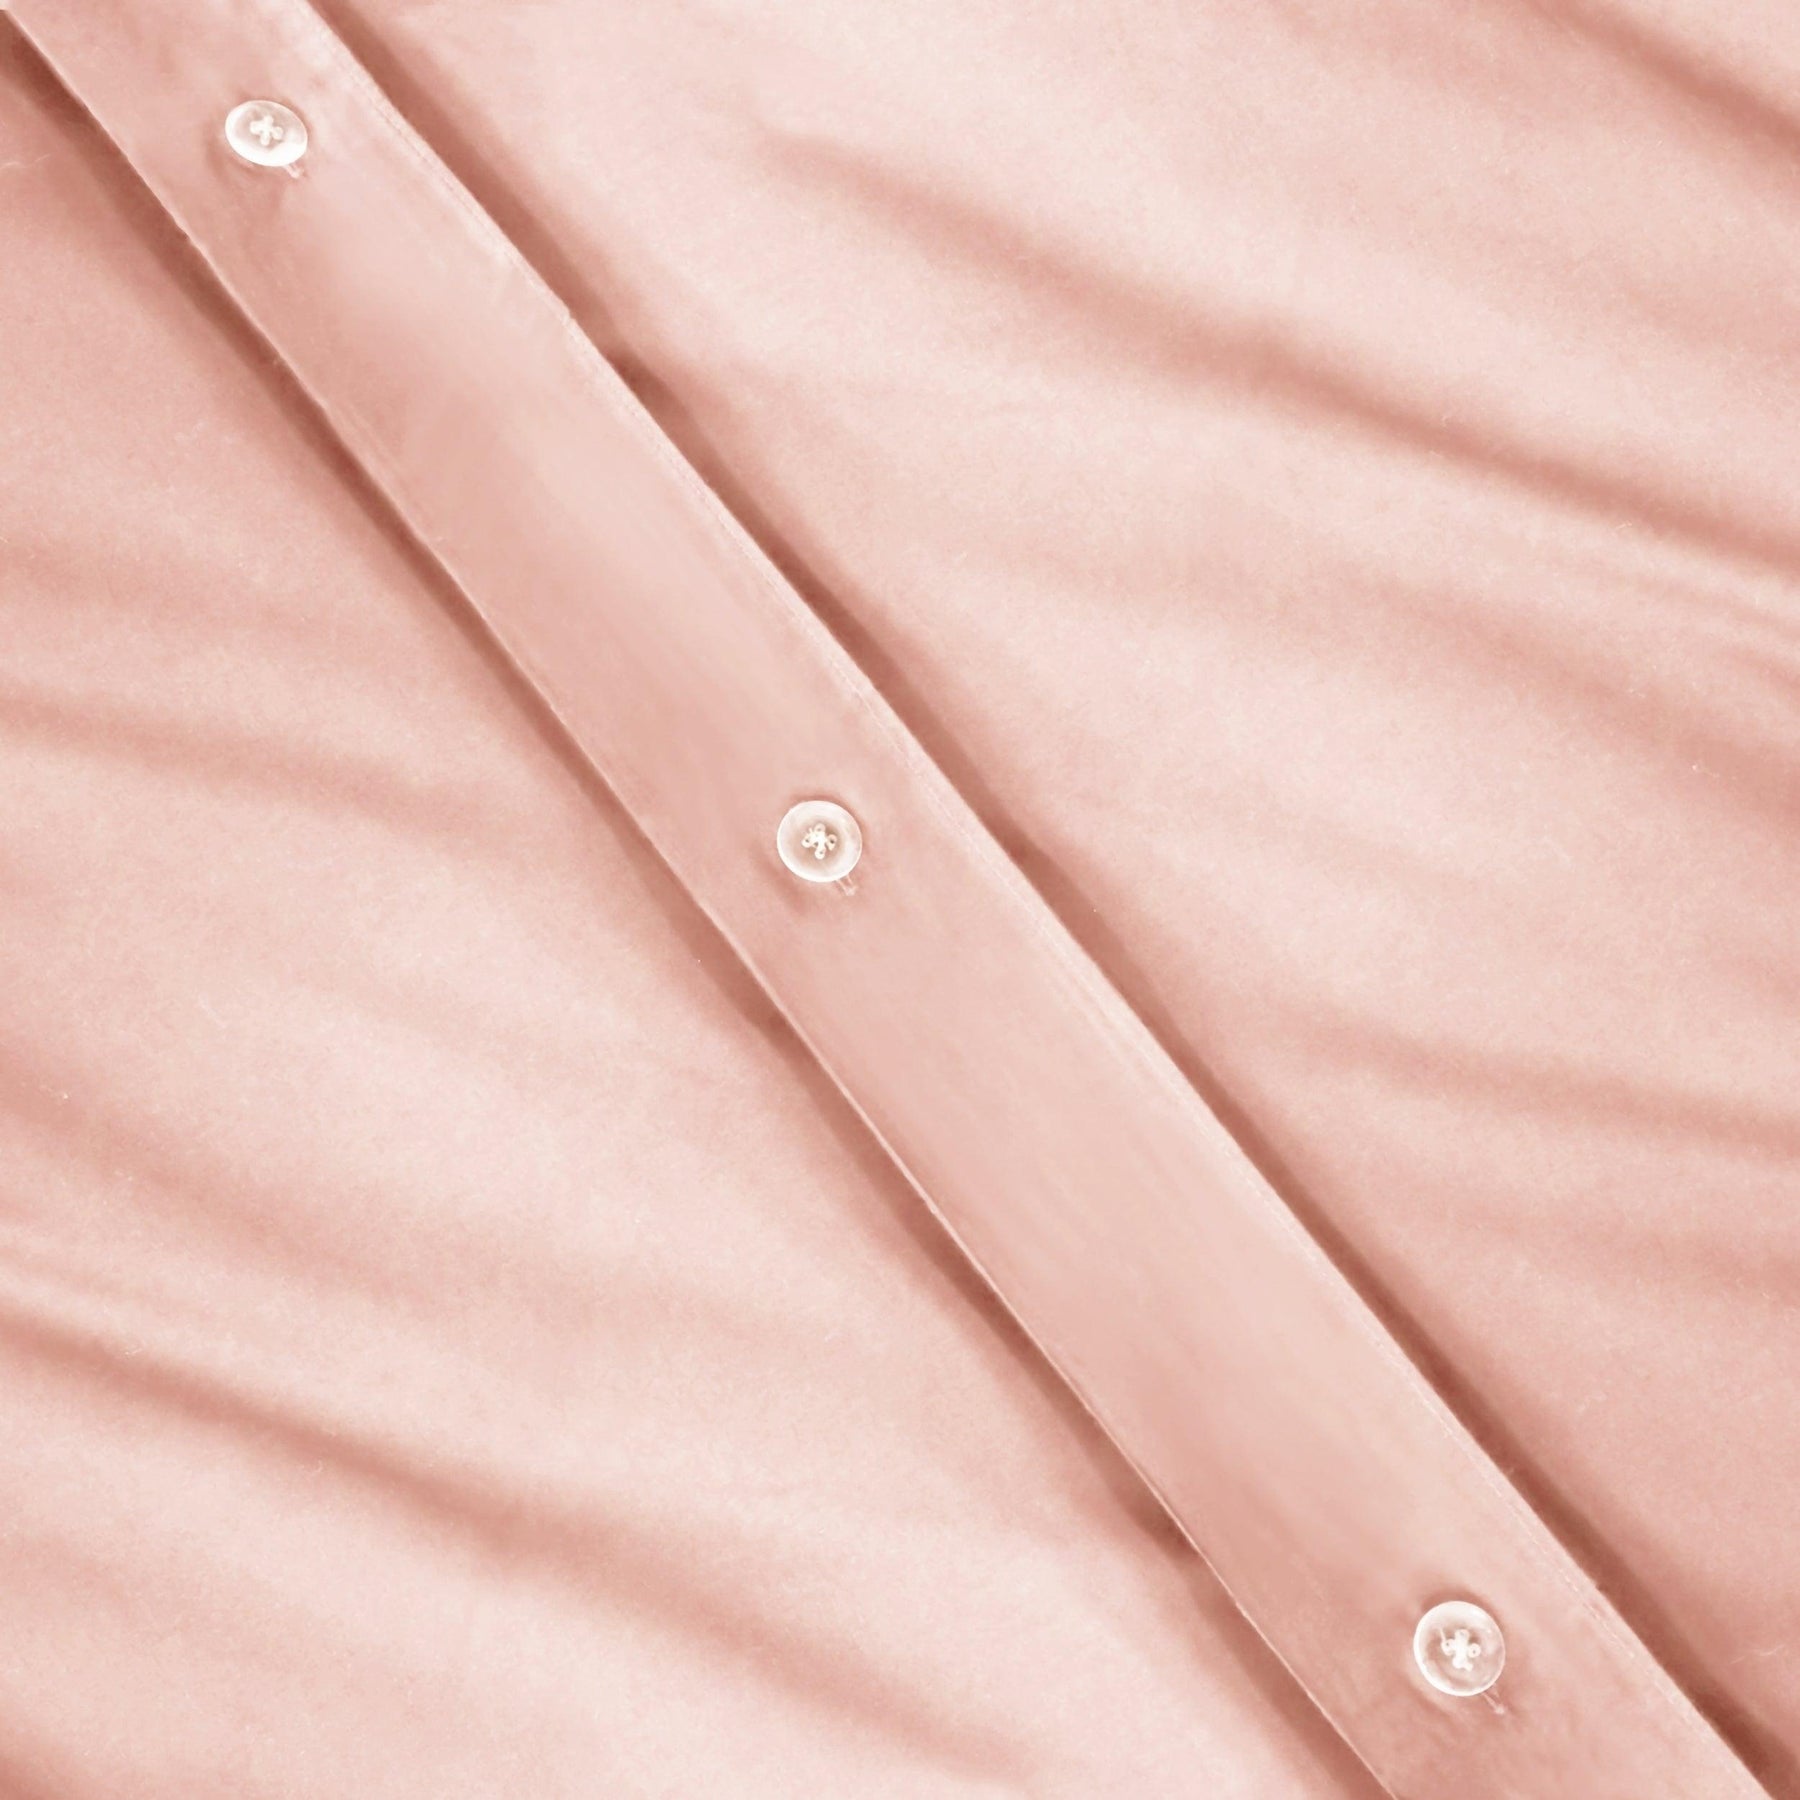 Superior Cotton Percale Modern Traditional Duvet Cover Set - Blush